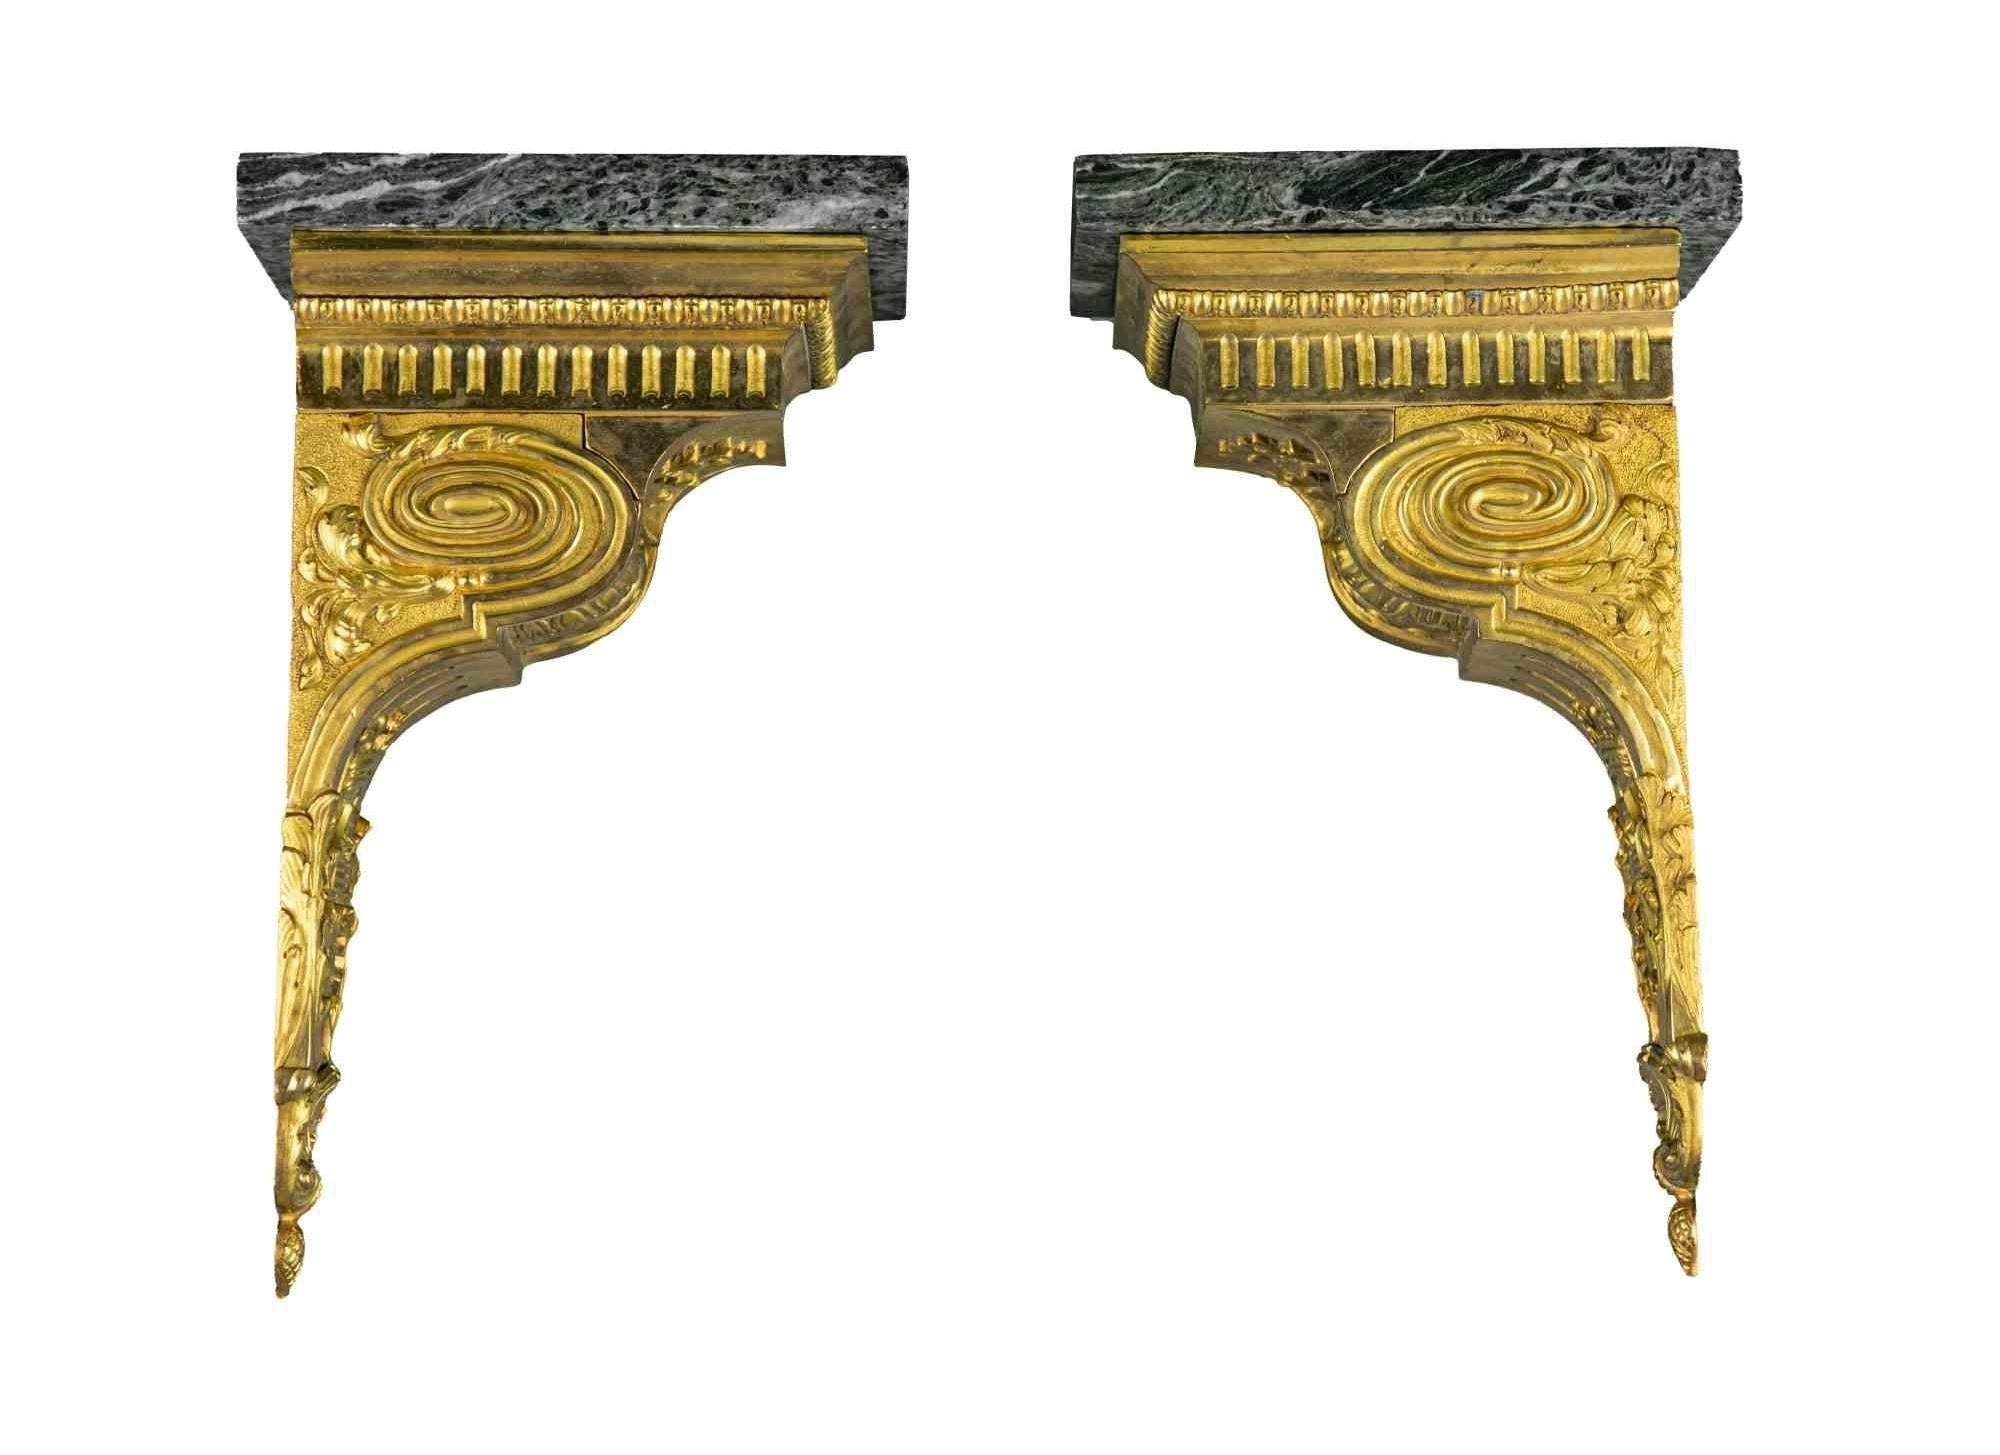 Bronze Shleves is an original object realized in the 14th century.

Pair of shelves in 